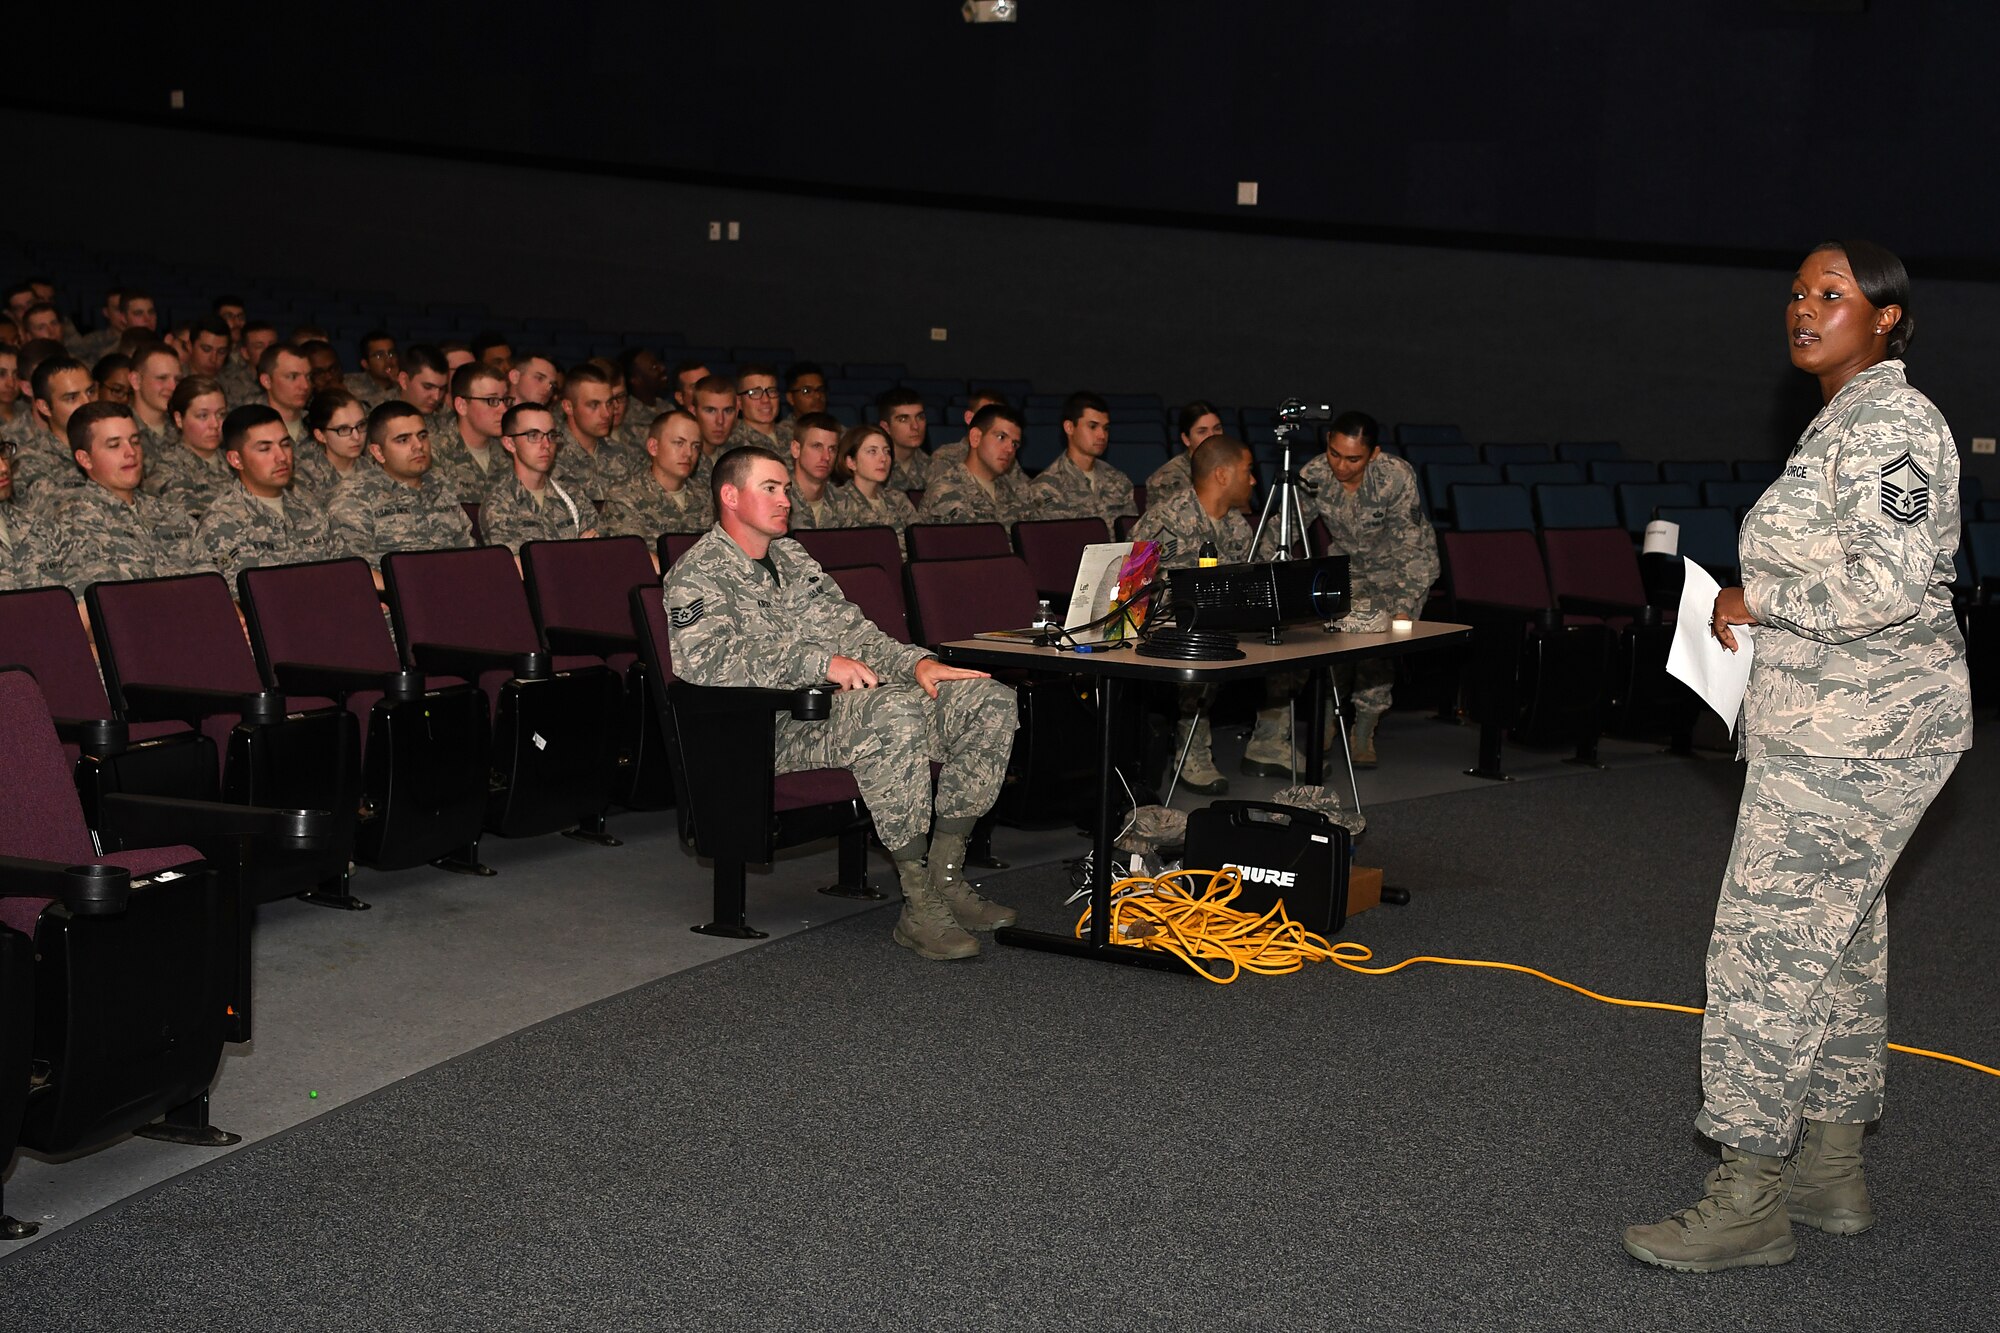 U.S. Air Force Senior Master Sgt. Tiffany Patterson, 81st Force Support Squadron career assistance advisor, speaks to Airmen during the Airmen Building Airmen Symposium at the Welch Theater at Keesler Air Force Base, Mississippi, April 6, 2018. The symposium also included a question and answer panel and a video. The symposium was held to empower Airmen and help them understand the impact they have on the future of the Air Force. (U.S. Air Force photo by Airman 1st Class Suzie Plotnikov)